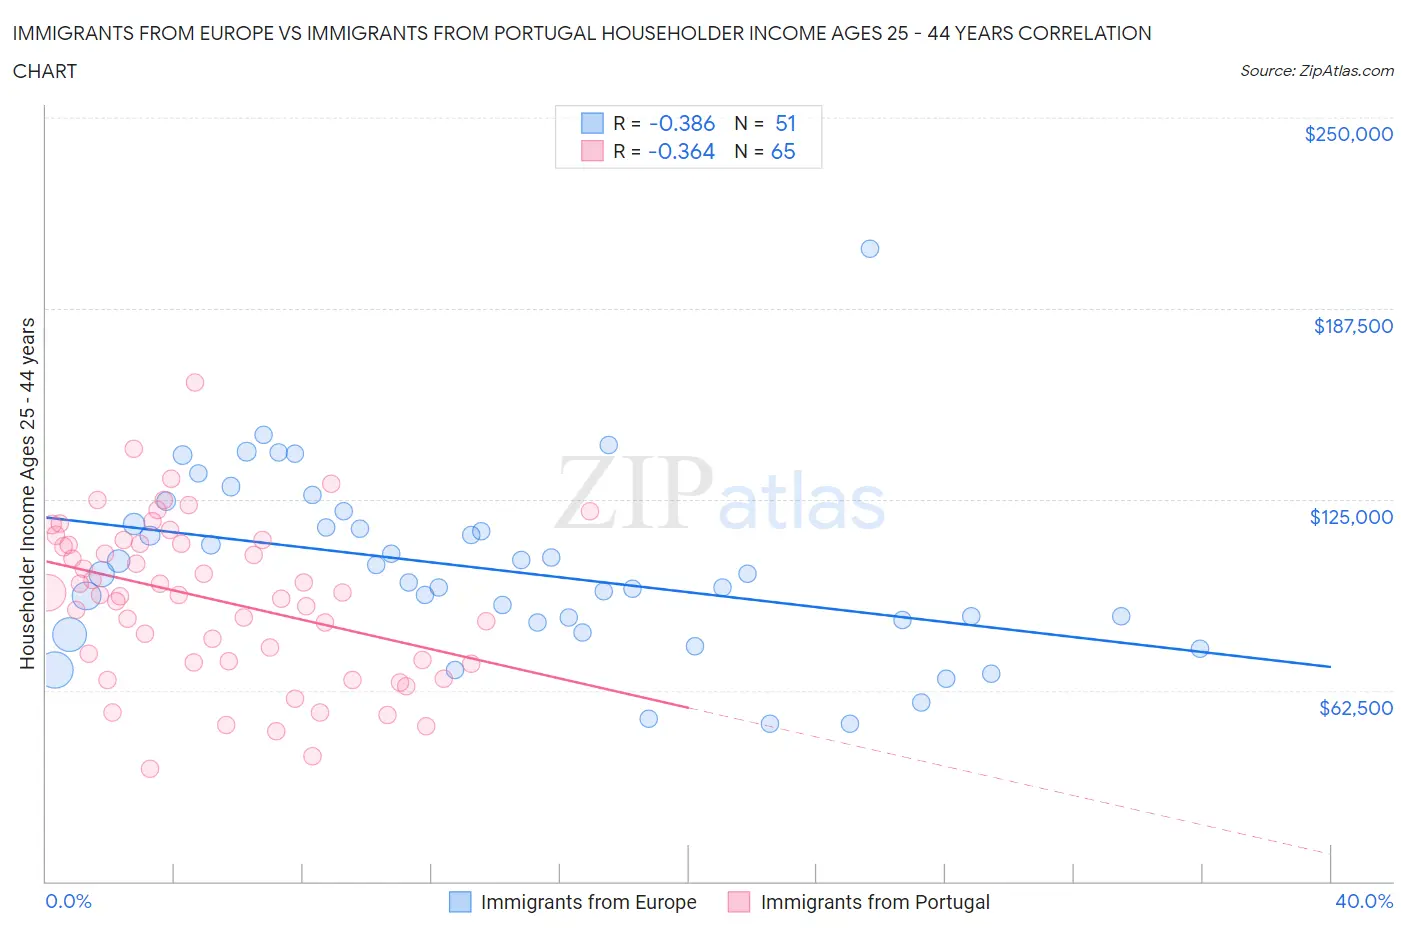 Immigrants from Europe vs Immigrants from Portugal Householder Income Ages 25 - 44 years